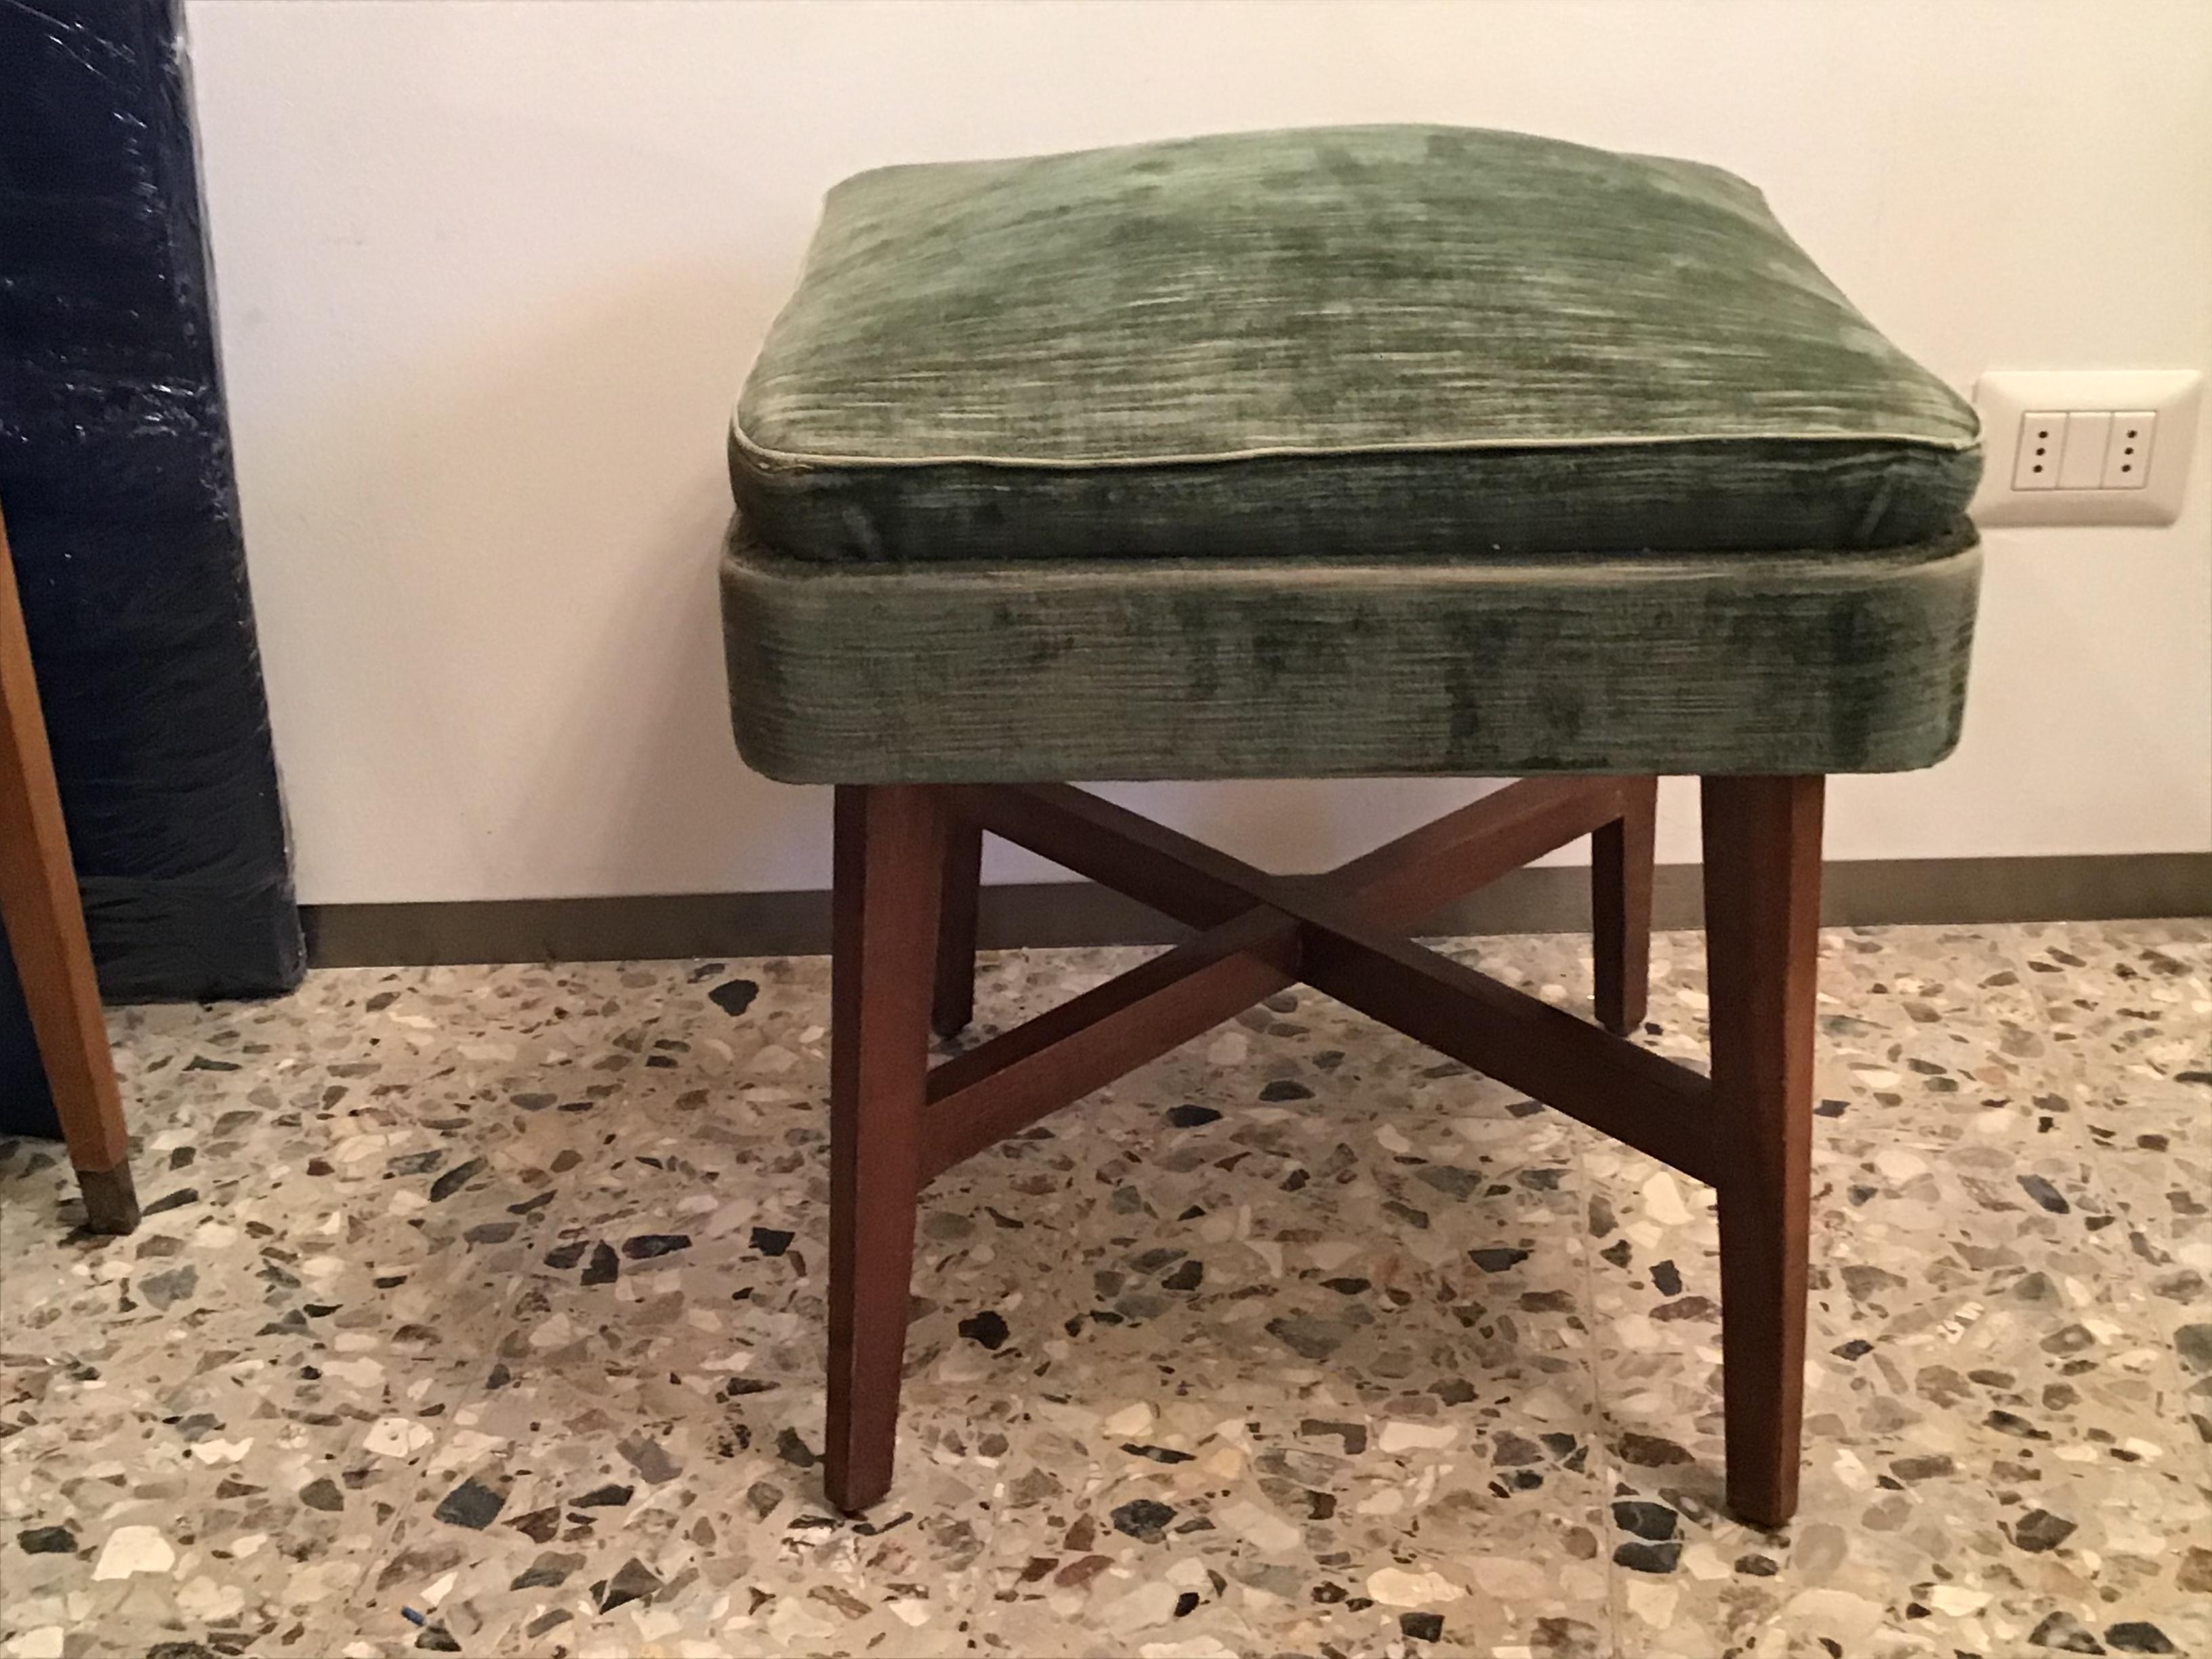 Gio Ponti “Stile” Pair of Benches /Stools Wood Seat Wood Velvet, 1950, Italy For Sale 3